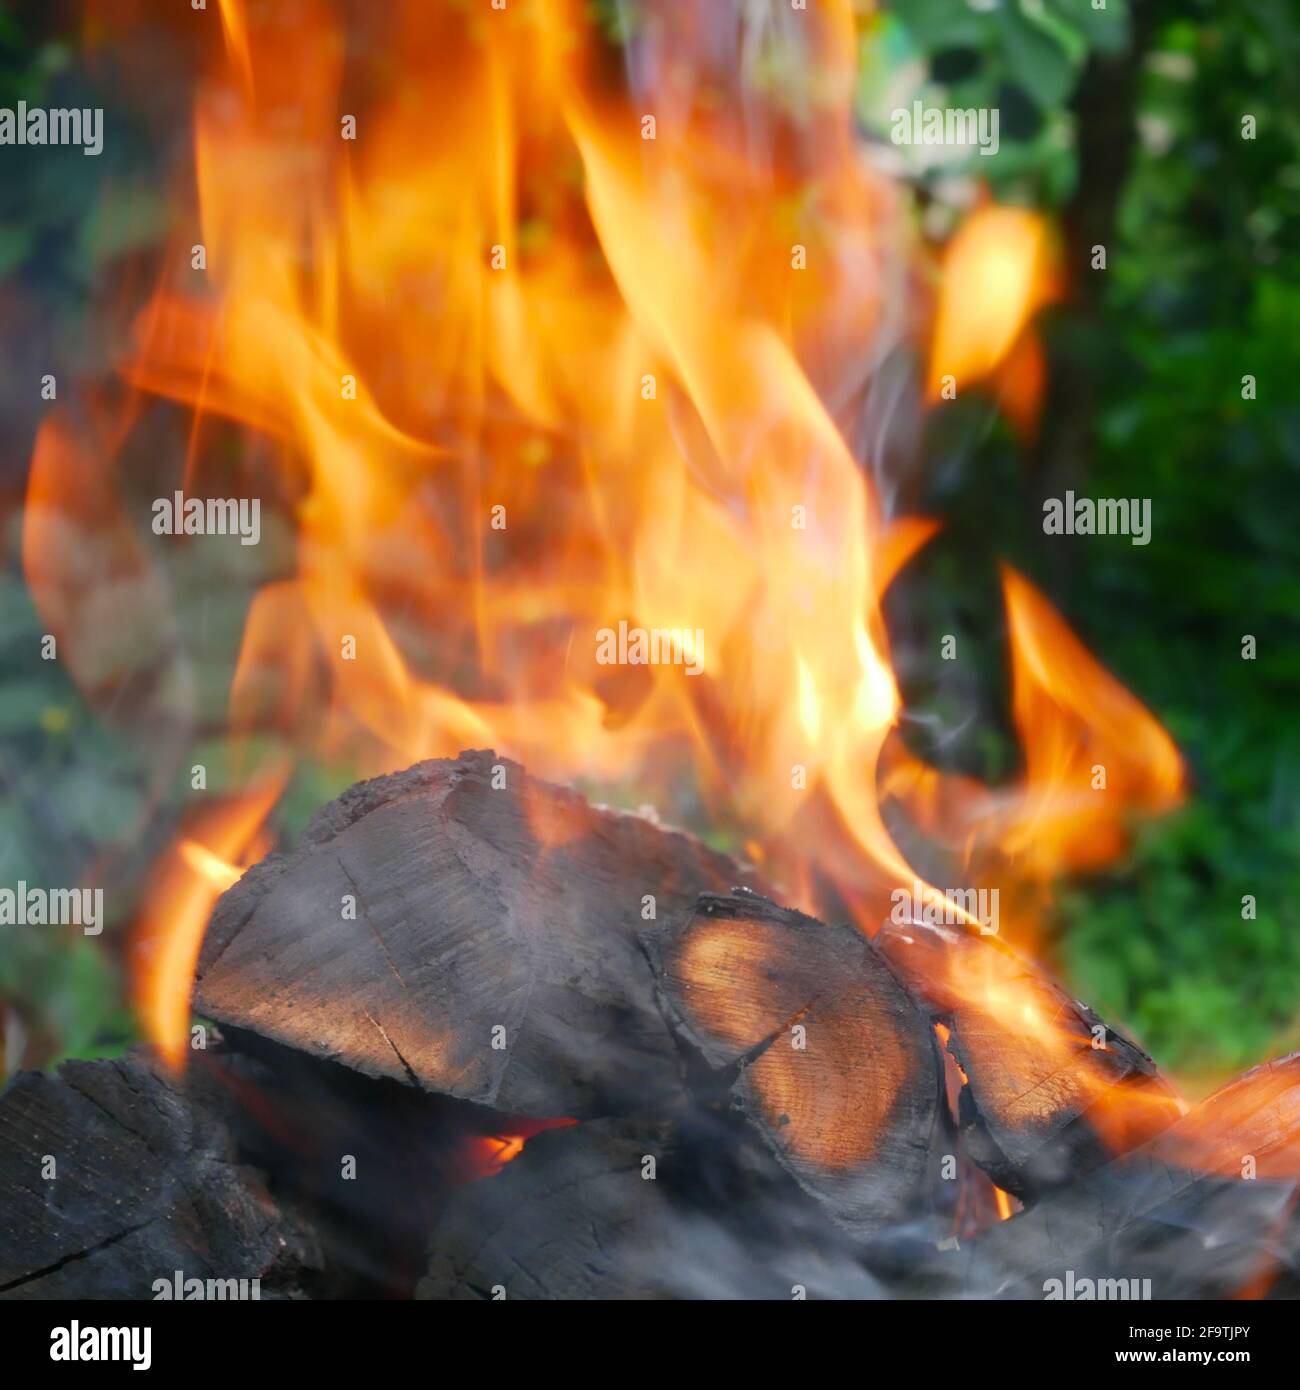 Red flame and ash over burning firewood outside on a background of green trees in summertime Stock Photo